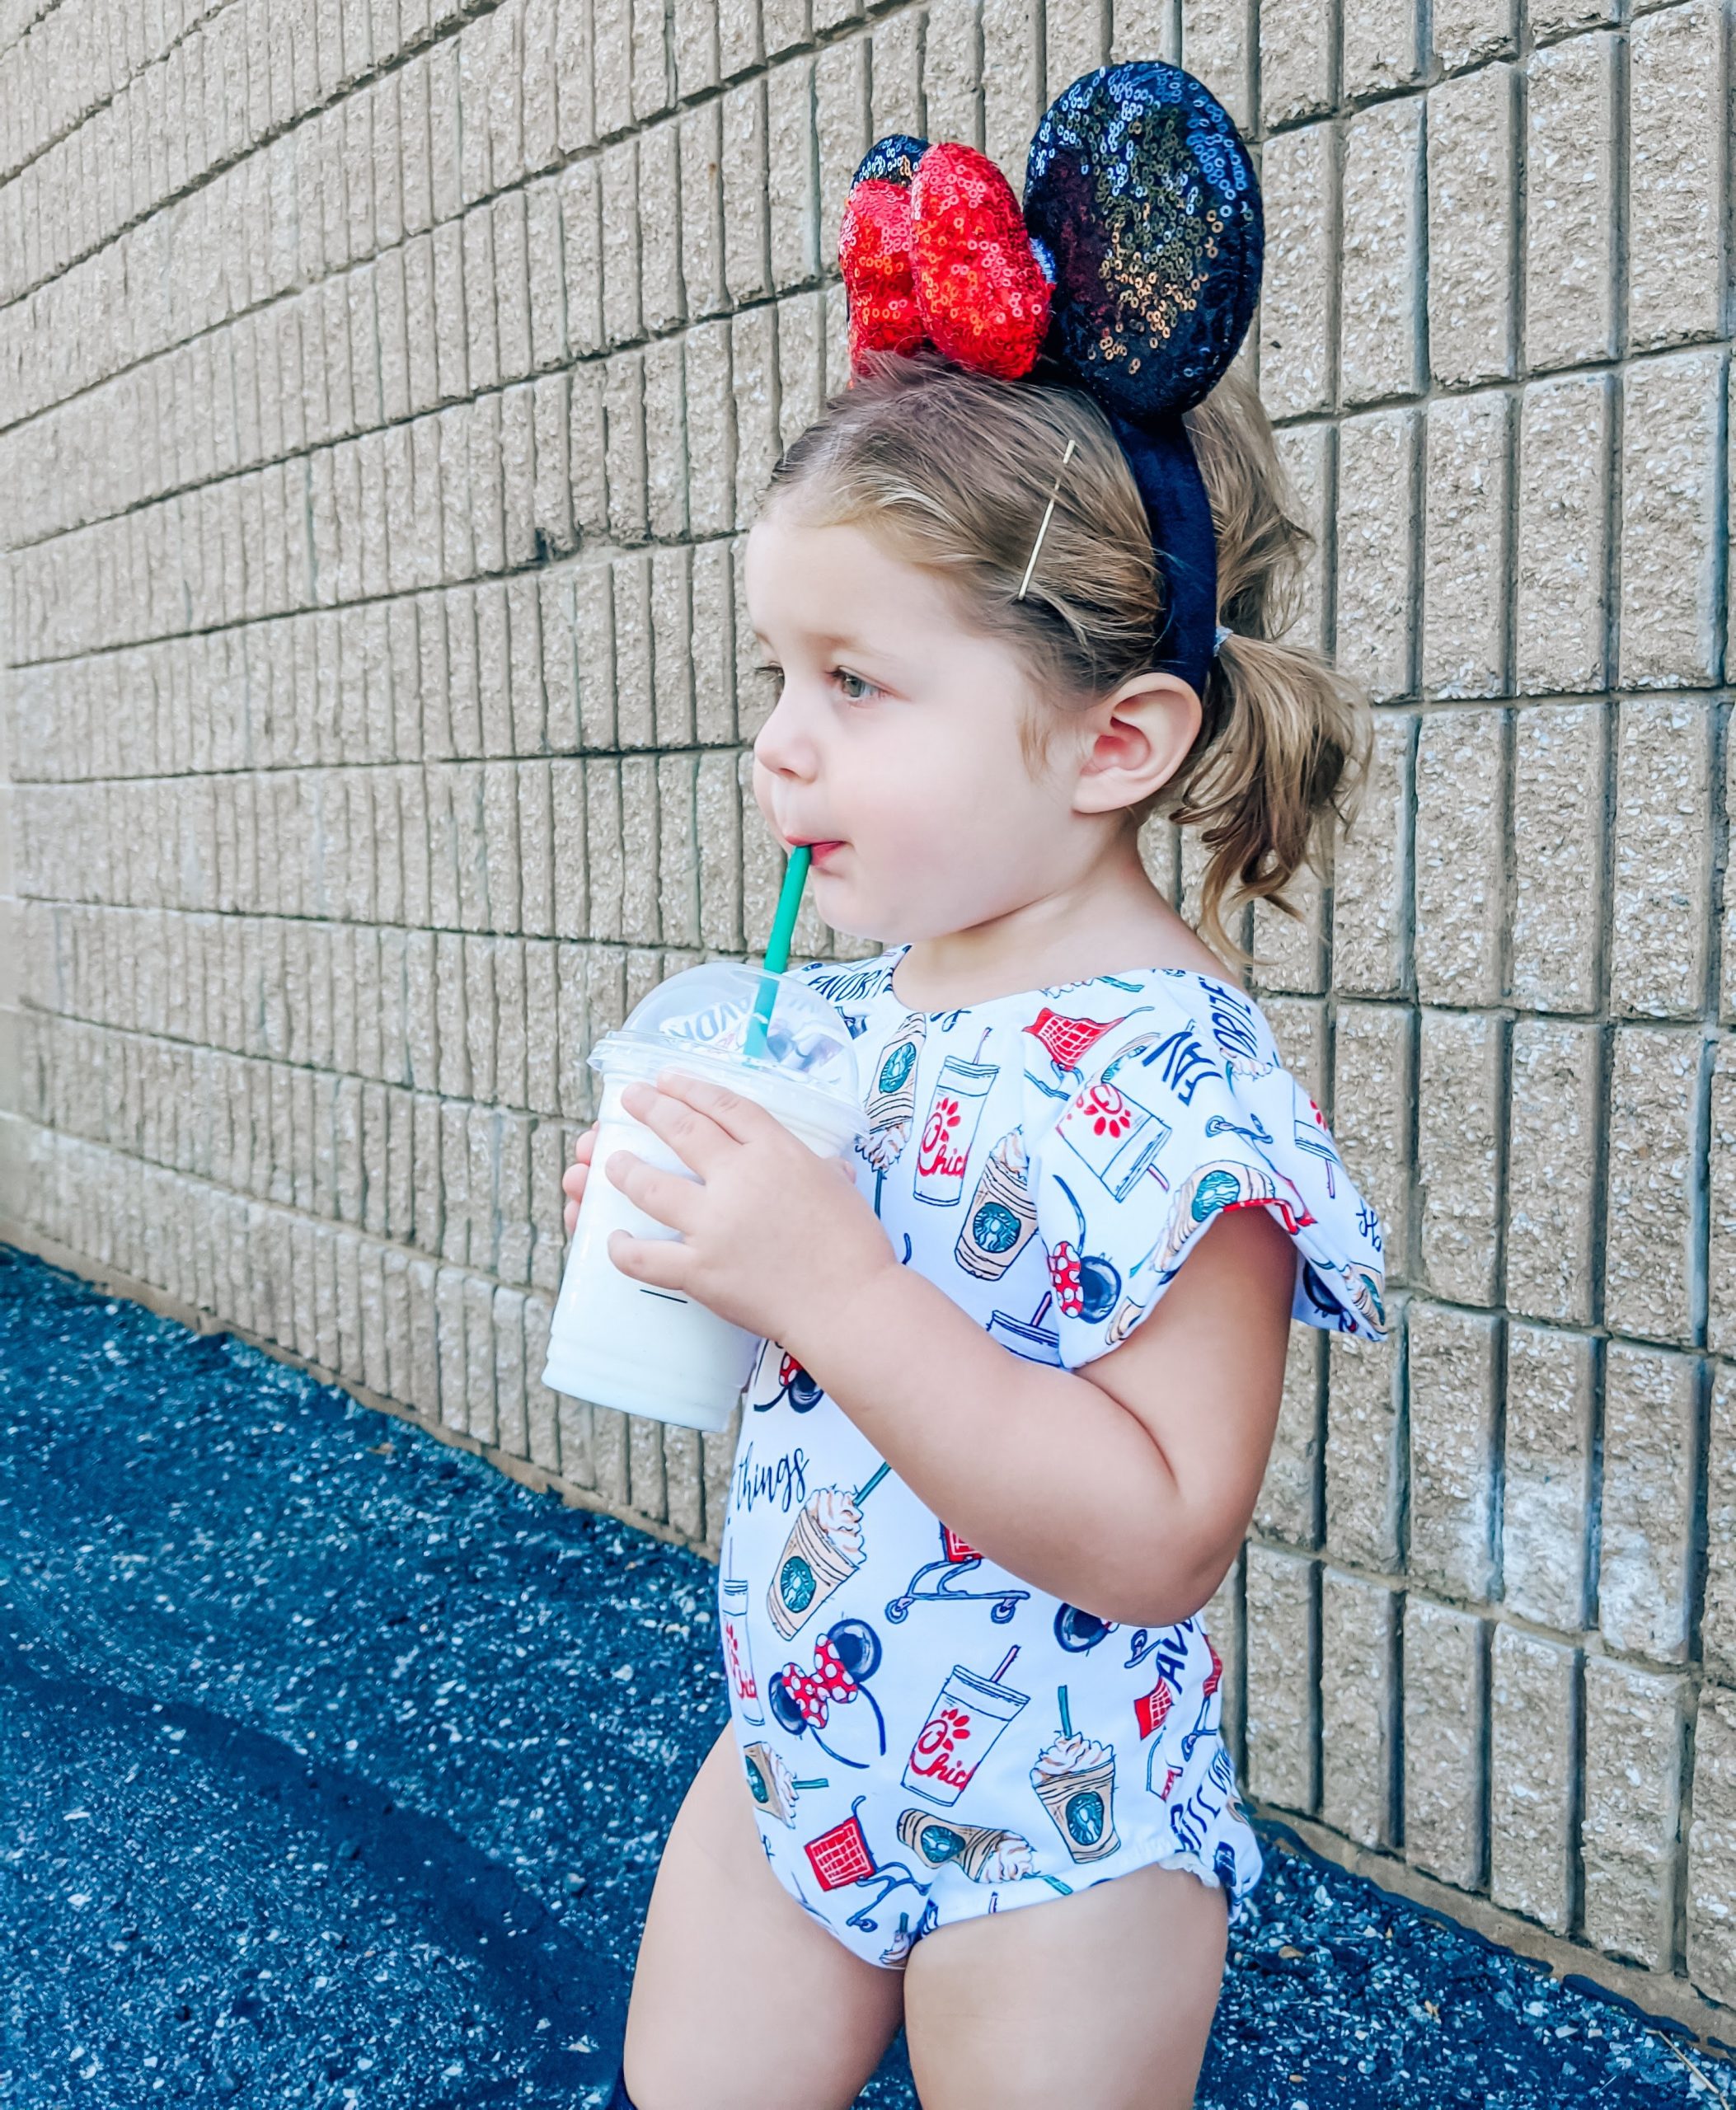 Disney Outfit Toddler Girl - Favorite Things Fabric - Favorite Things Leotard: The perfect Disney outfit for your toddler girl! This Lili.Lane Favorite Things leotard features Disney, Starbucks, Chick-fil-A, and Target all in one! #favoritethings #disney #leotard #littledancer #mouseears